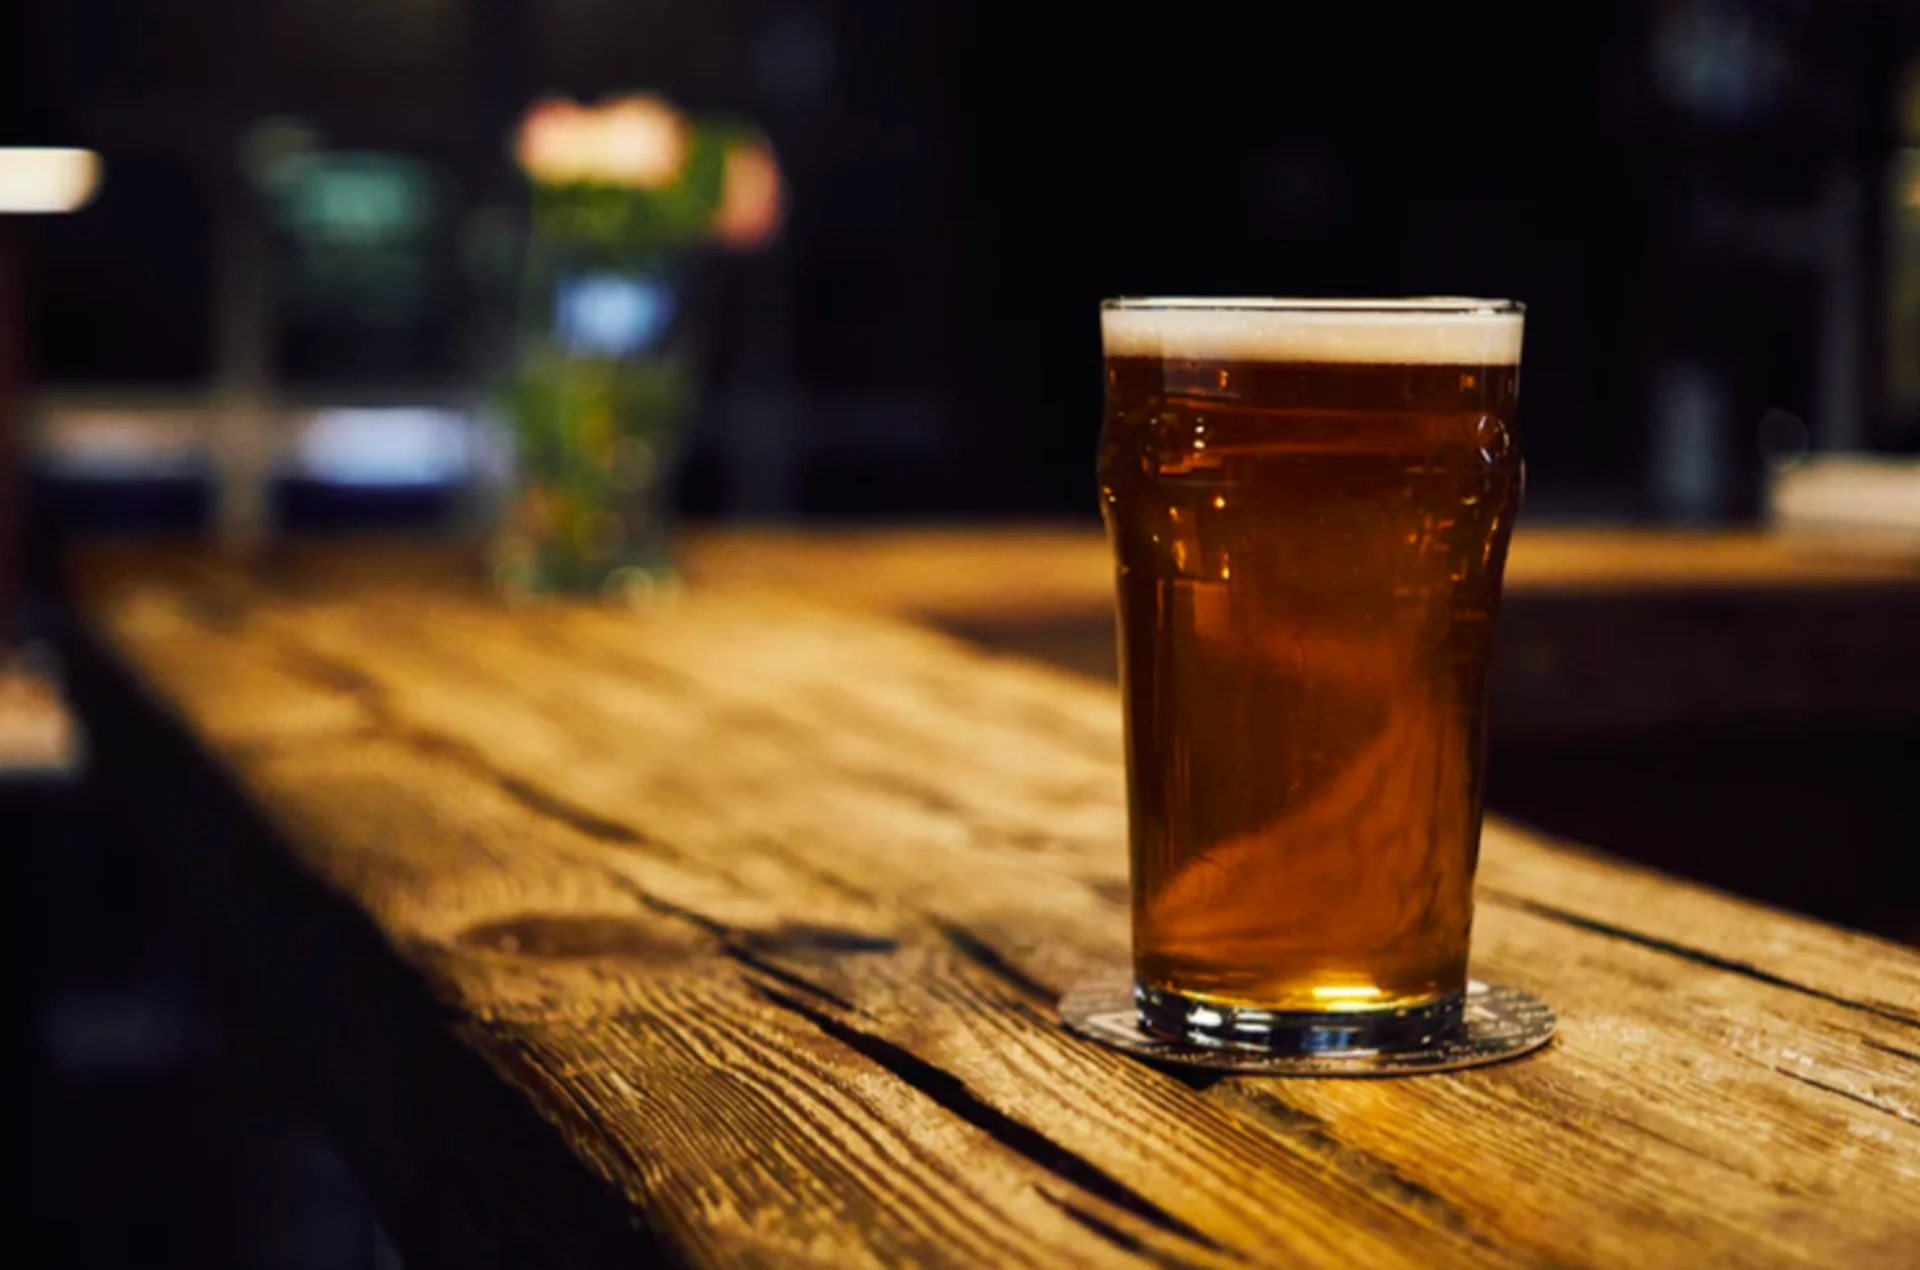 Beer was brewed from wastewater, this is what it tasted like